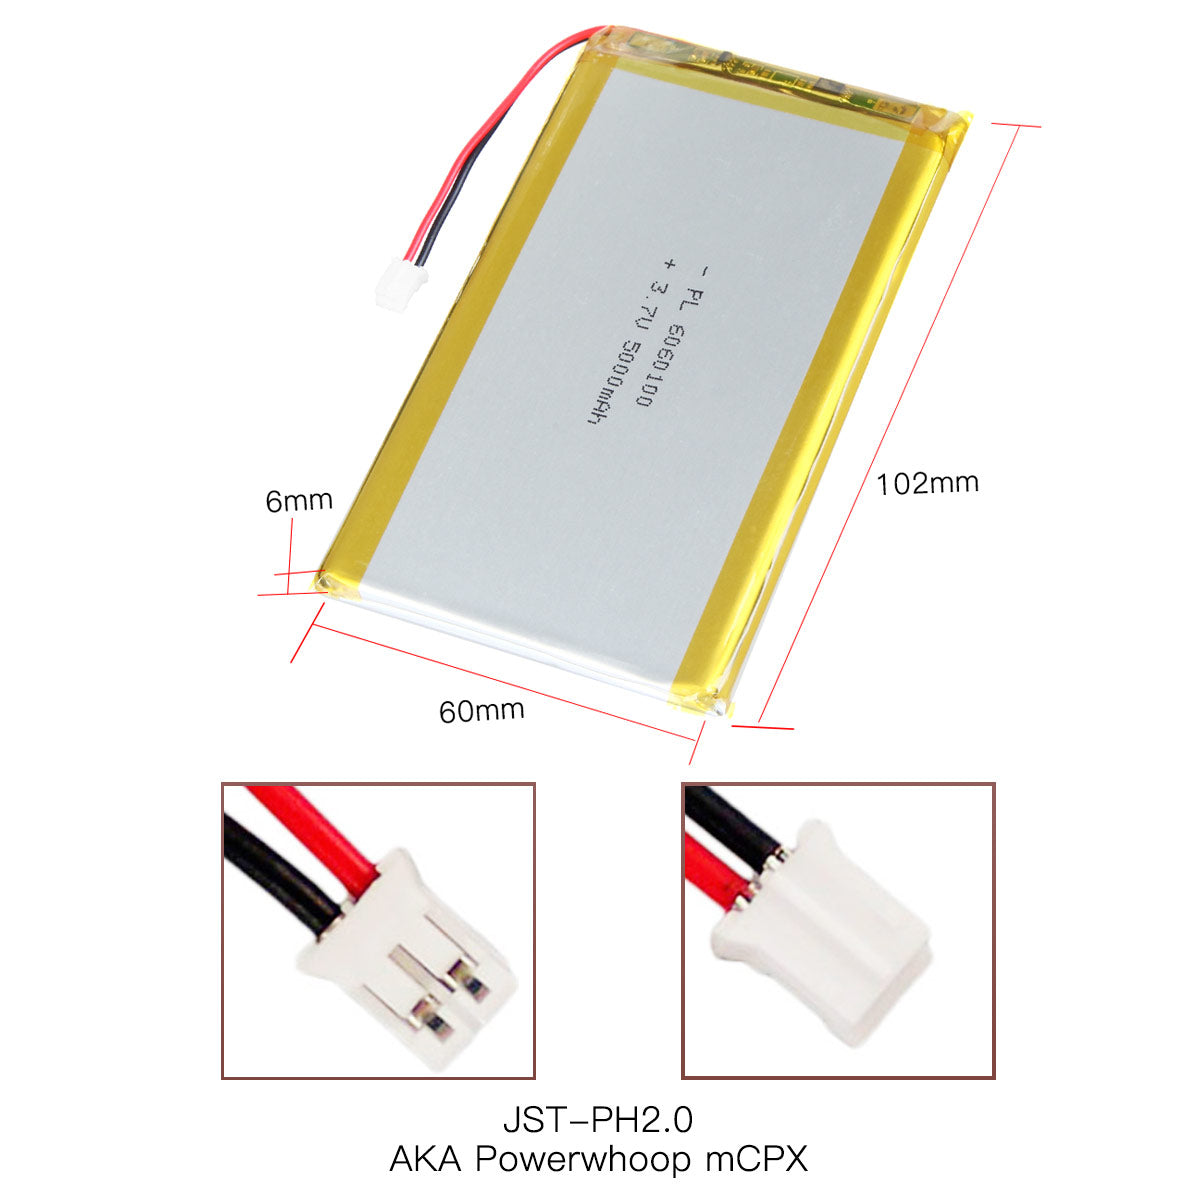 YDL 6060100 3.7 v 5000mAh Rechargeable Lithium Polymer Battery